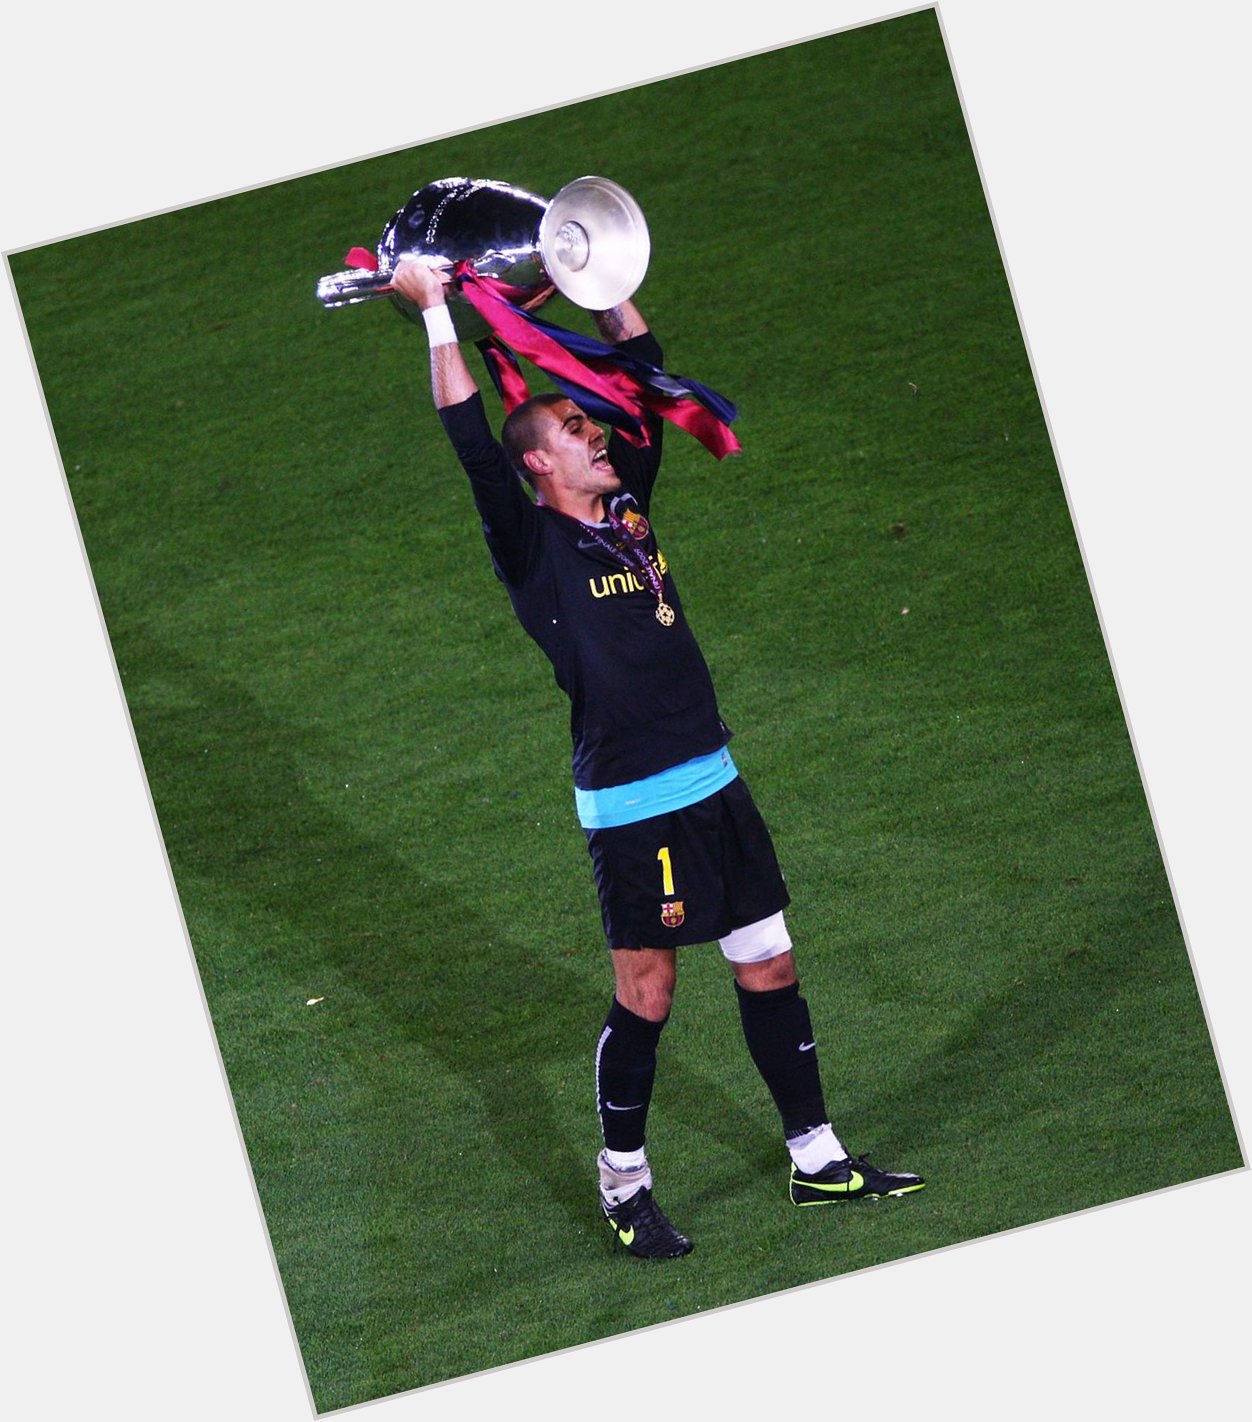 \"Happy birthday to three-time winner, Víctor Valdés! - messageed by: 